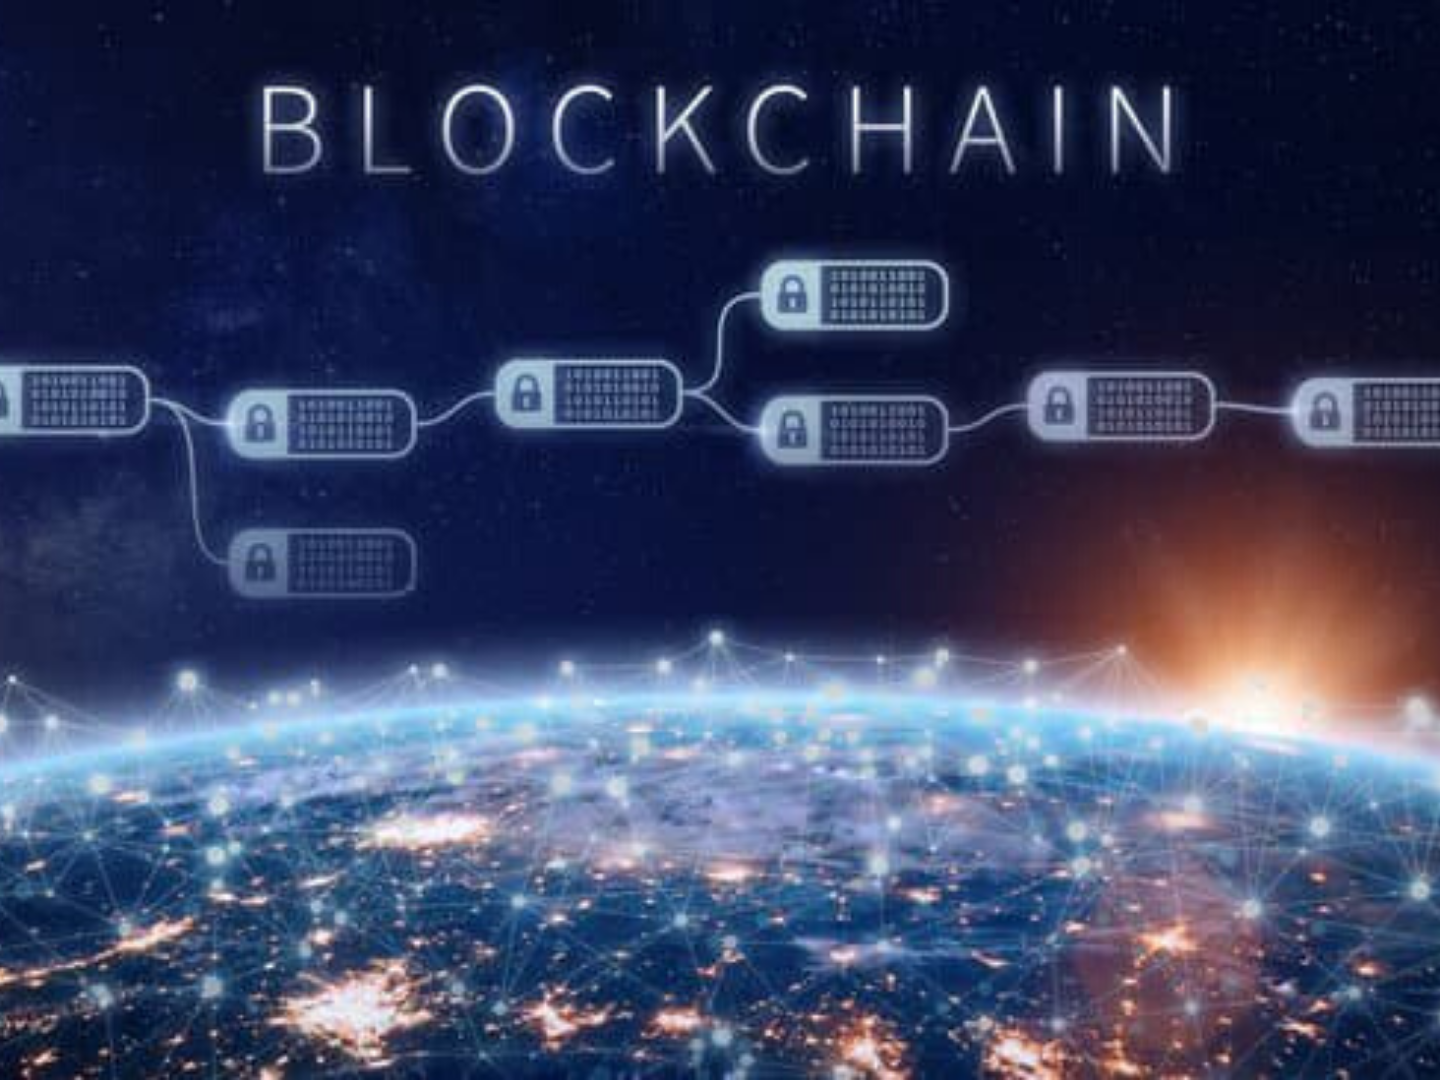 how big is the blockchain